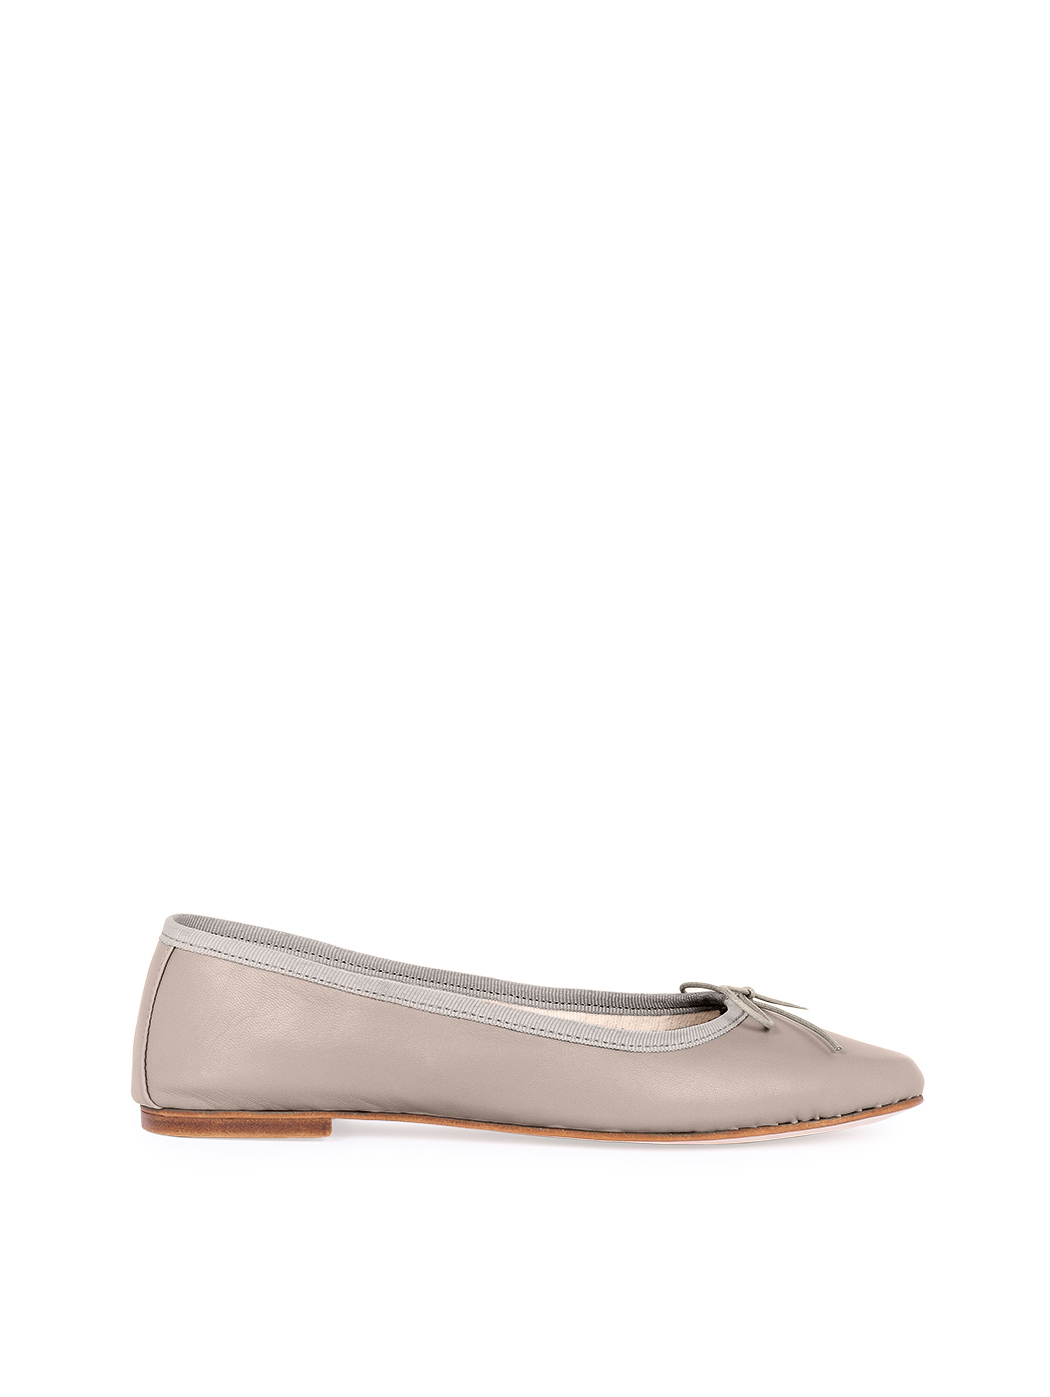 Ballerina Shoes - Taupe Nappa 